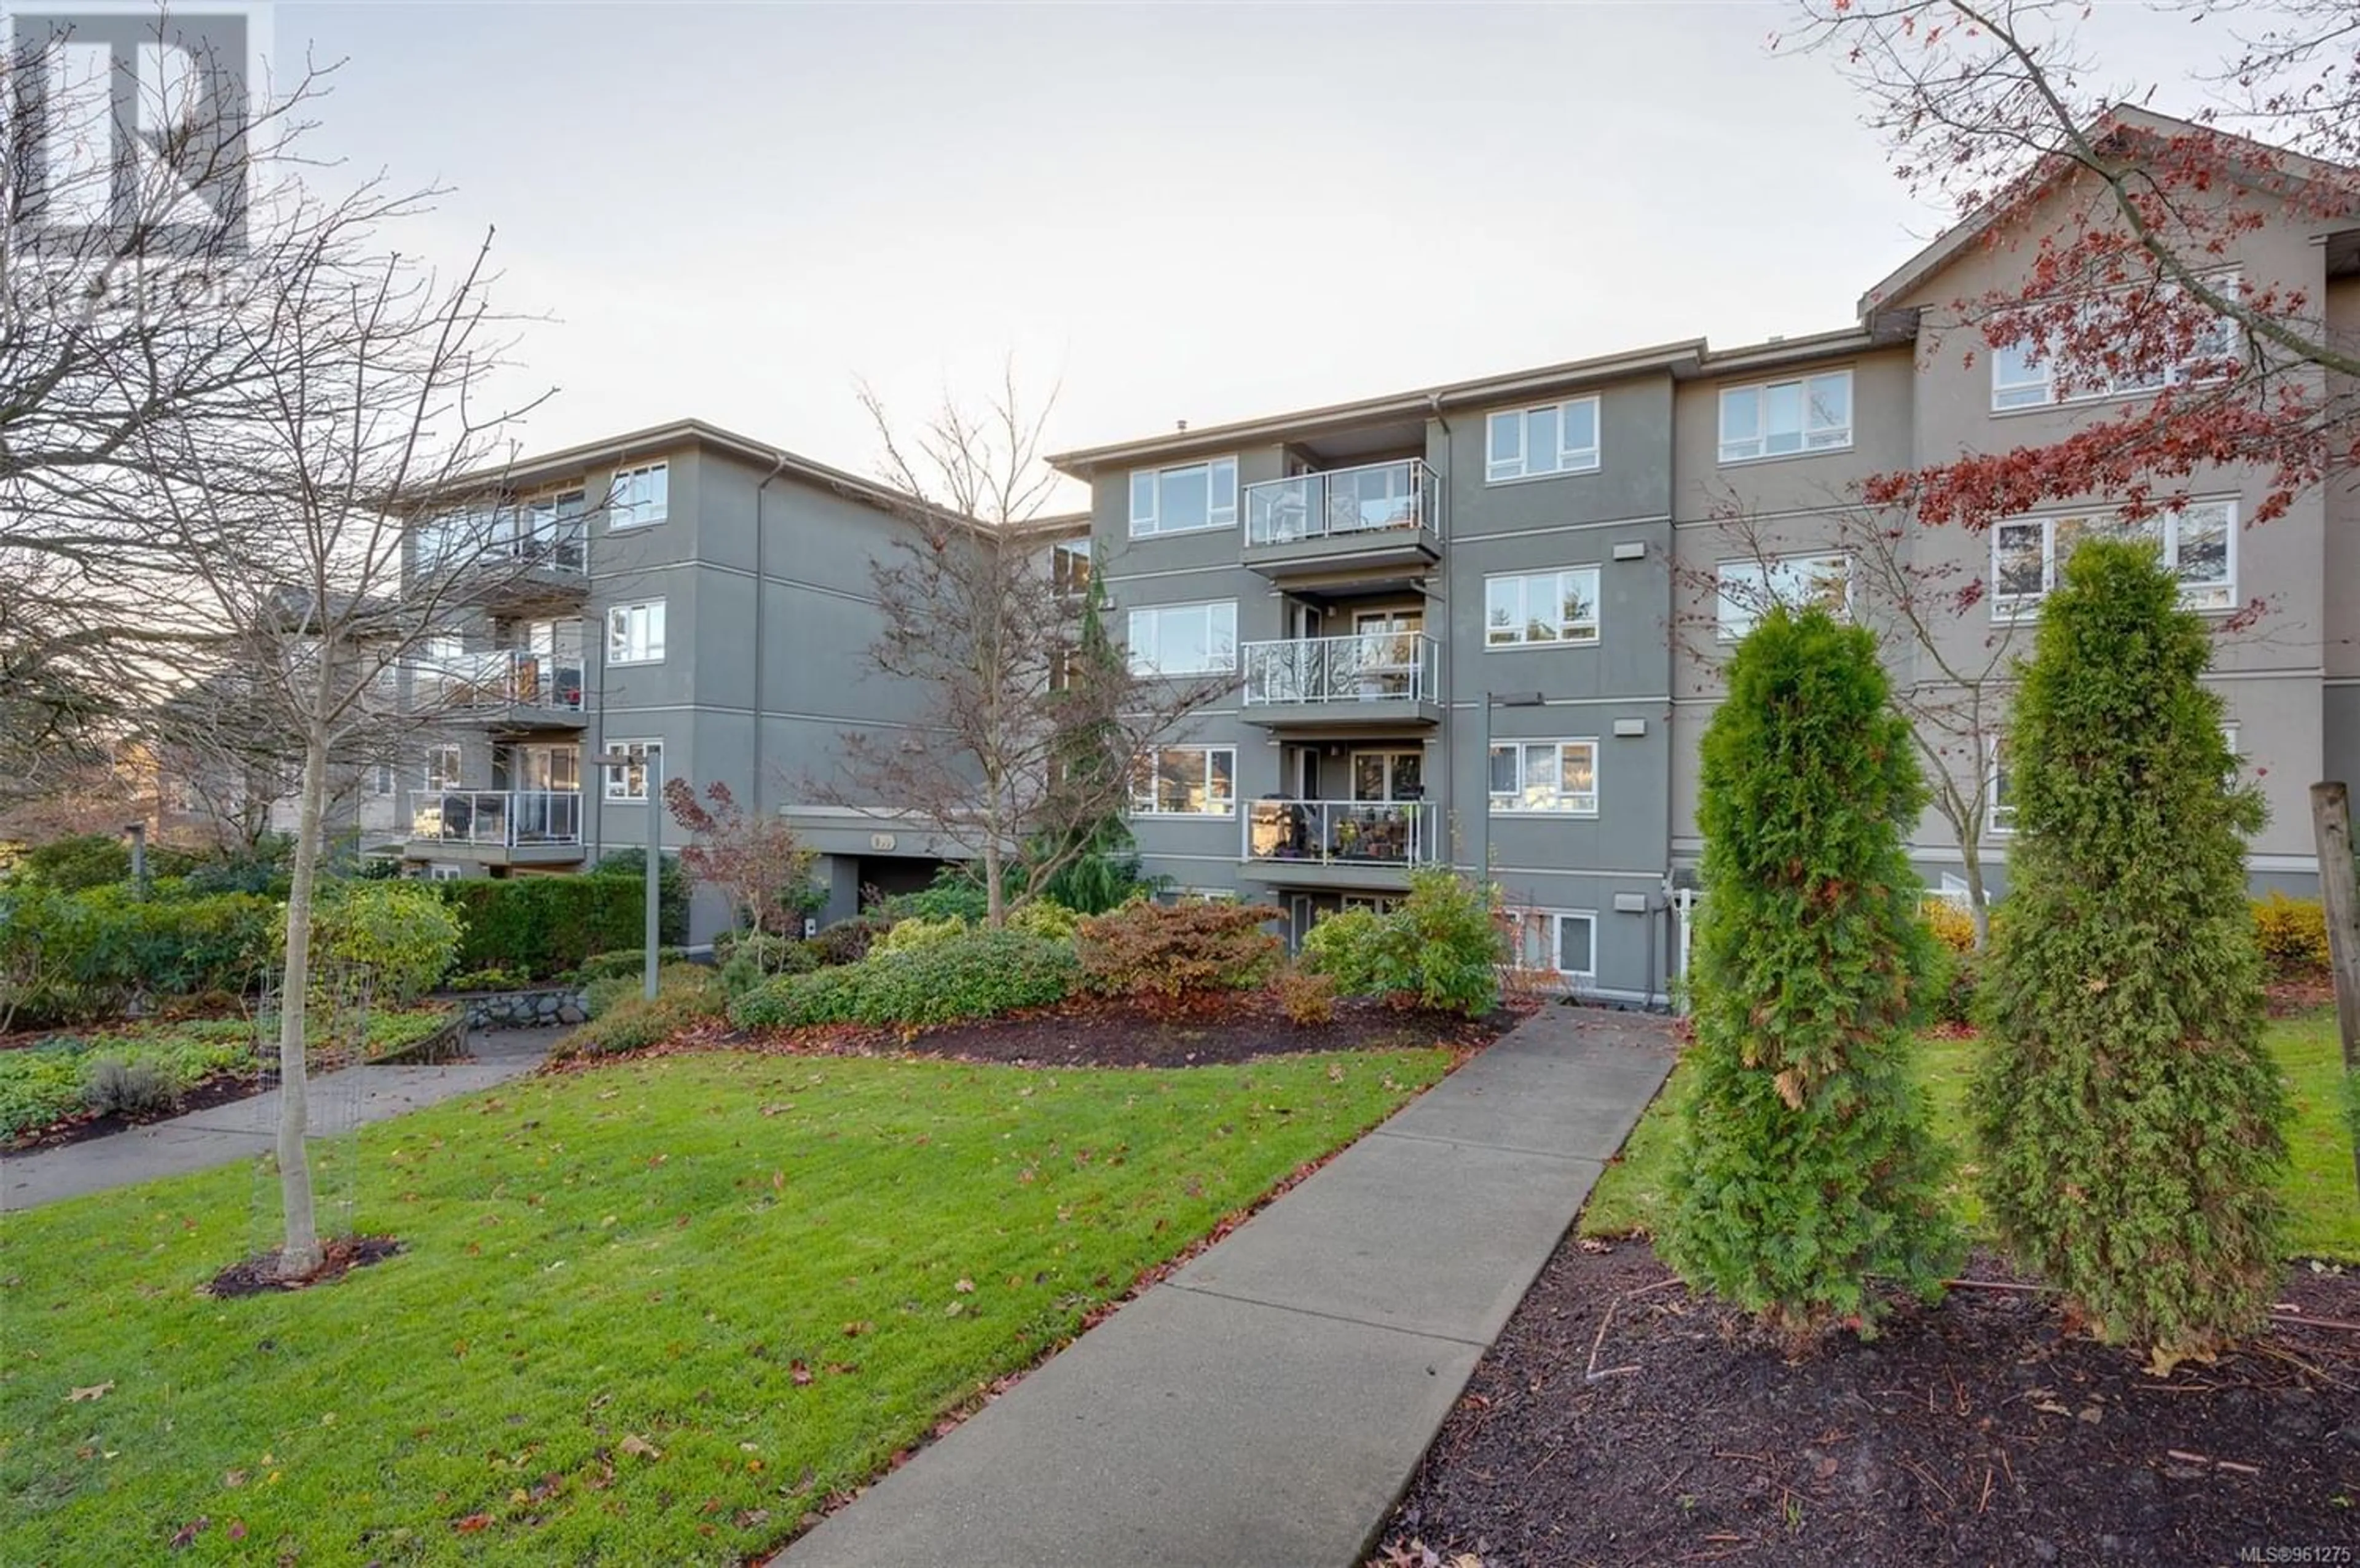 A pic from exterior of the house or condo for 307 951 Topaz Ave, Victoria British Columbia V8T2M2